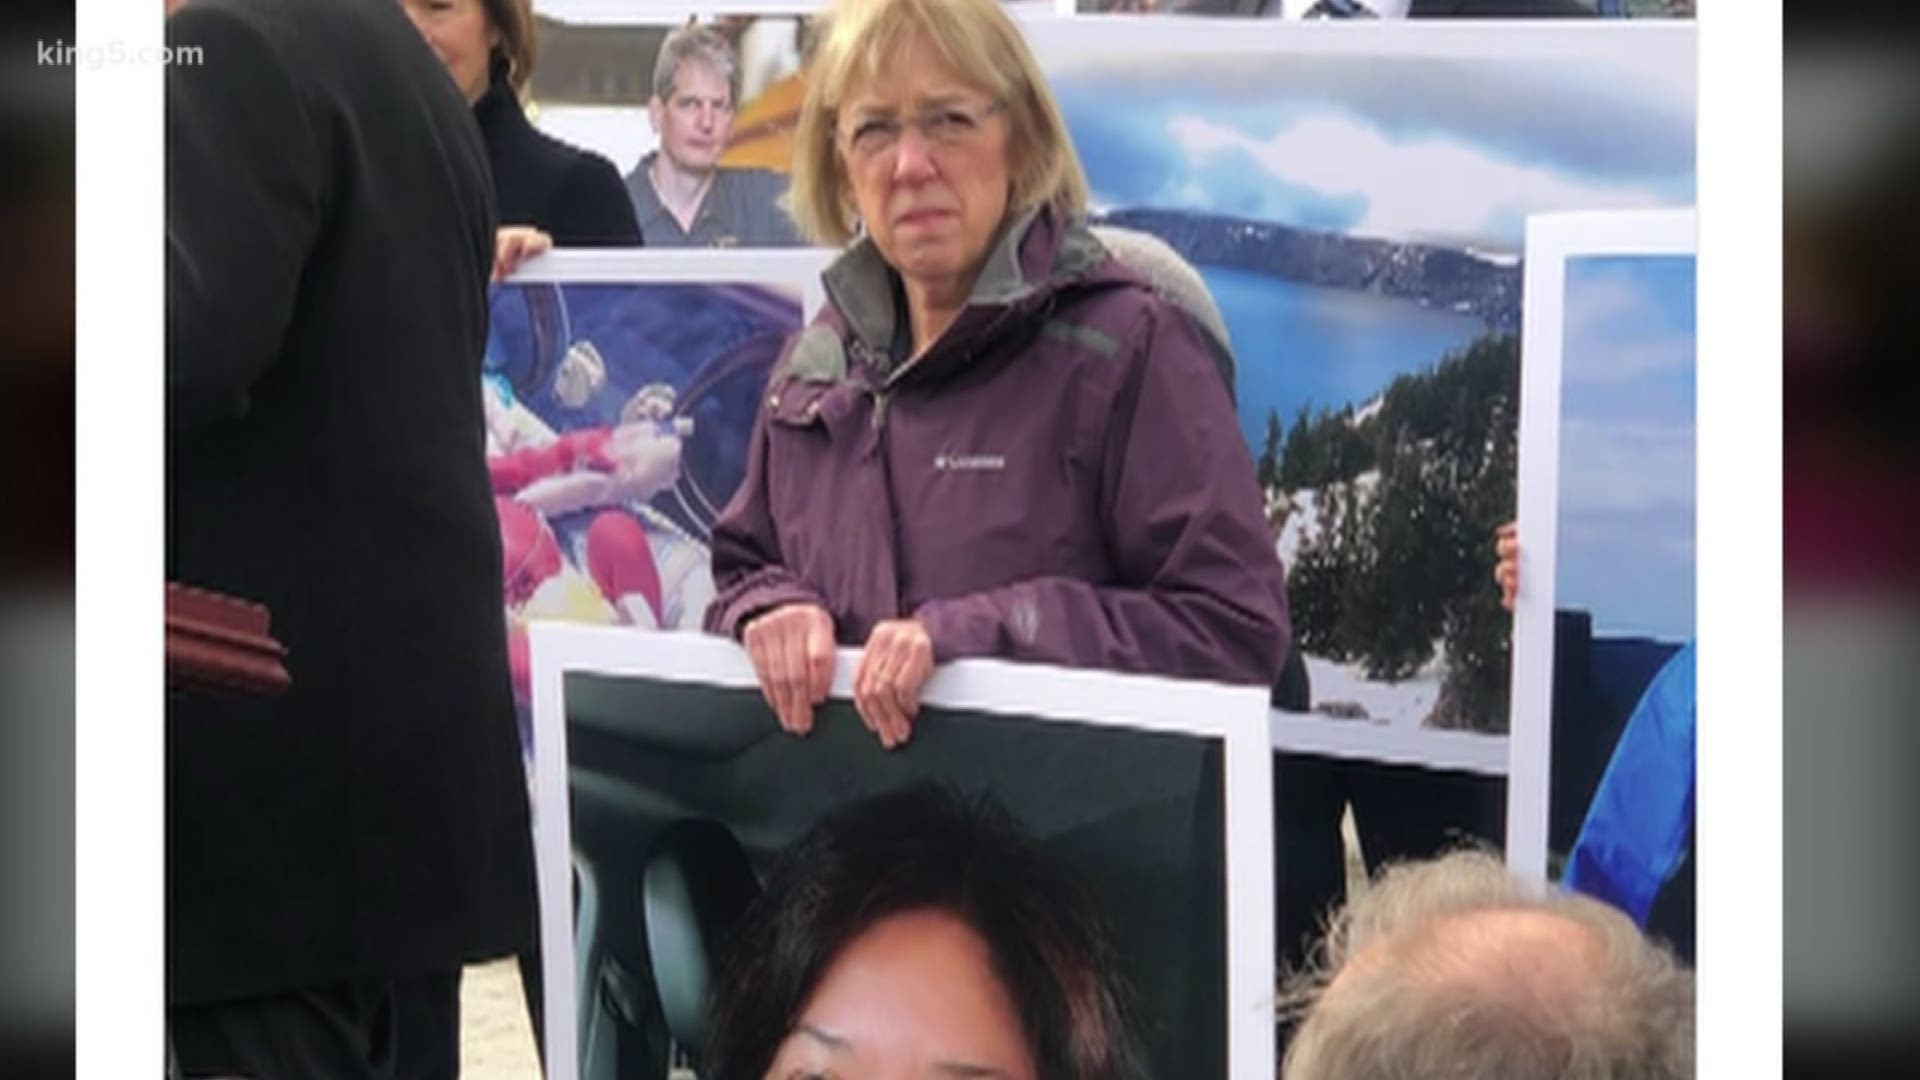 Sen. Patty Murray highlights the plight of Washington woman with a federal job during the ongoing government shutdown. KING 5's Natalie Swaby reports: